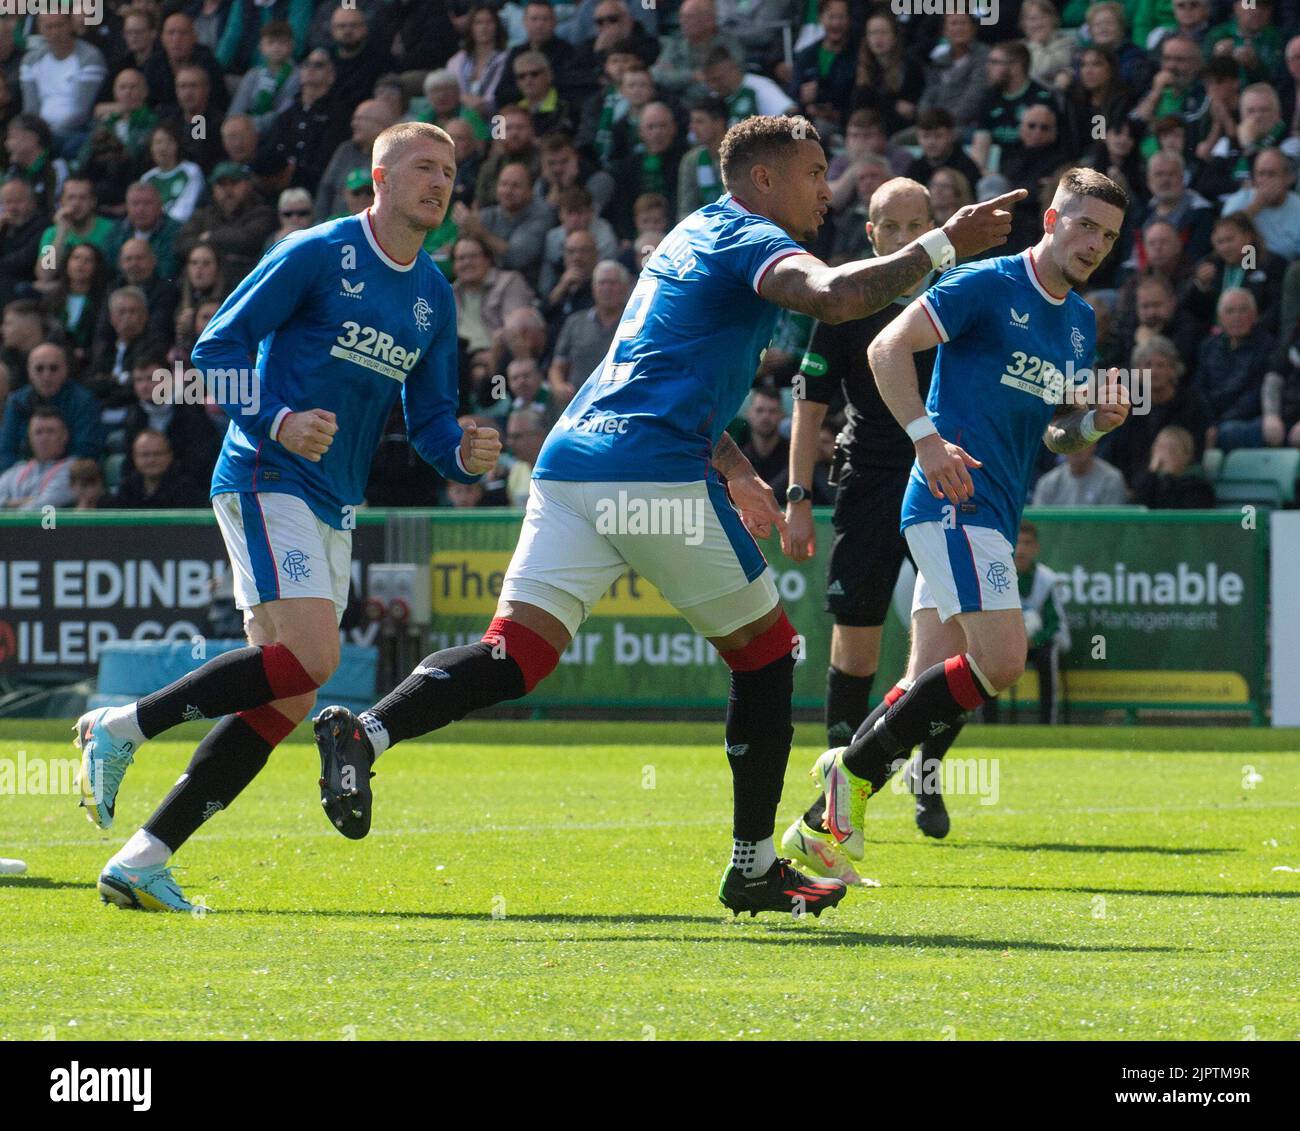 Edinburgh, UK. 20th Aug, 2022. Cinch Premiership - Hibernian v Rangers. 20/08/2022. Hibernian play host to Rangers in the cinch Premiership at Easter Road Stadium, Edinburgh, Midlothian, UK. Pic shows: Ranger's defender, James Tavernier, celebrates after putting Rangers 1-0 ahead in the 45th minute from the penalty spot. Credit: Ian Jacobs/Alamy Live News Stock Photo